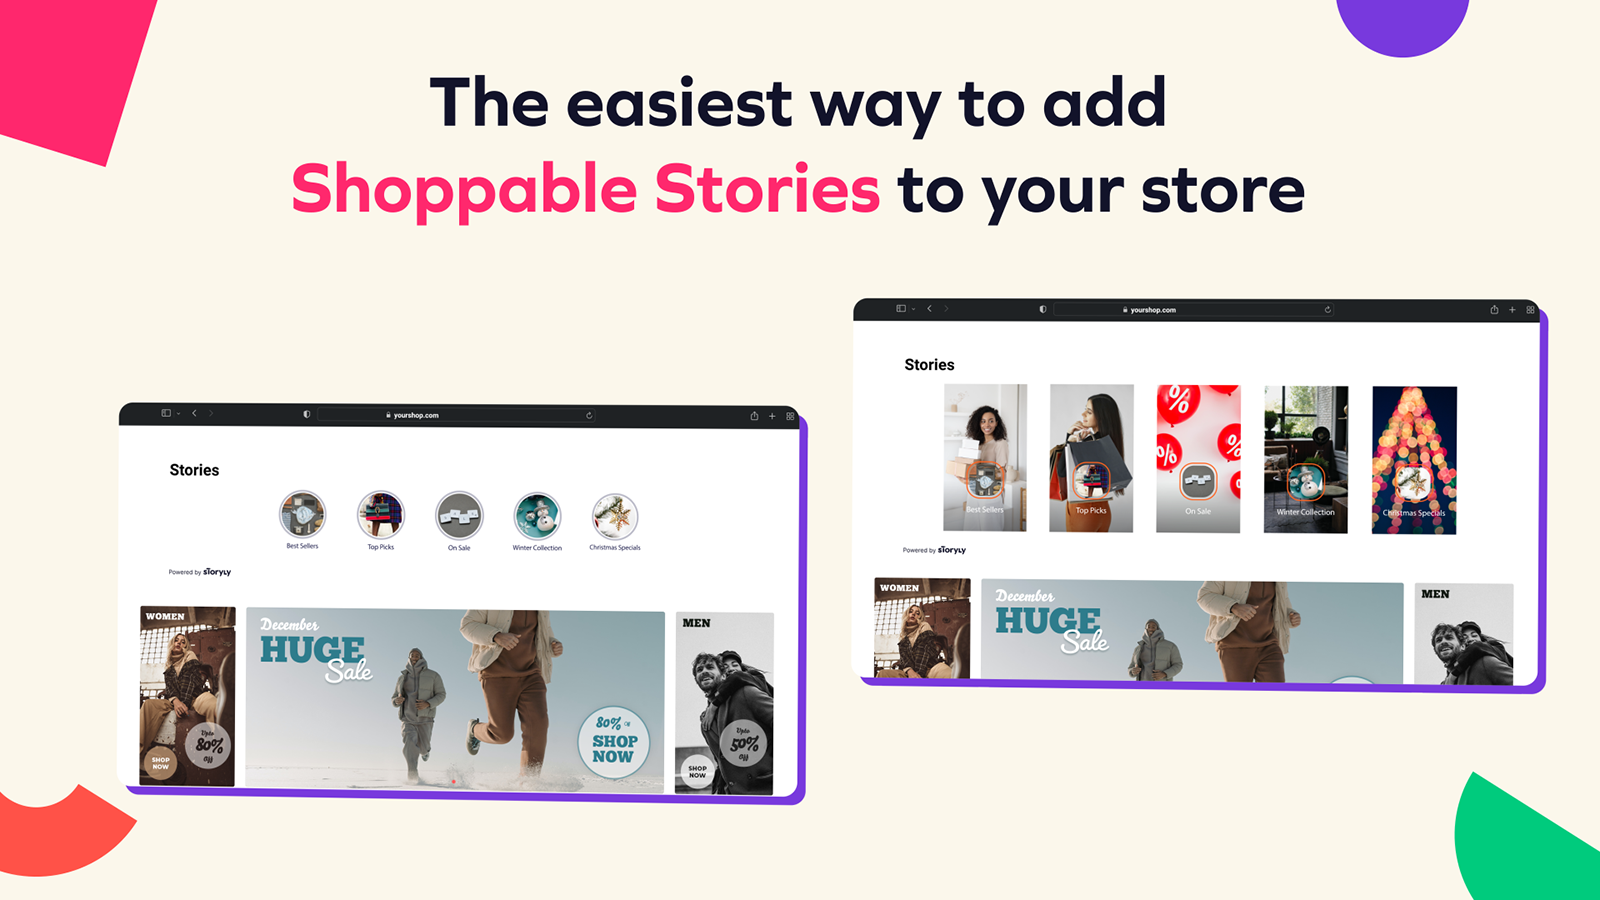 This image contains the benefit of automated shoppable stories